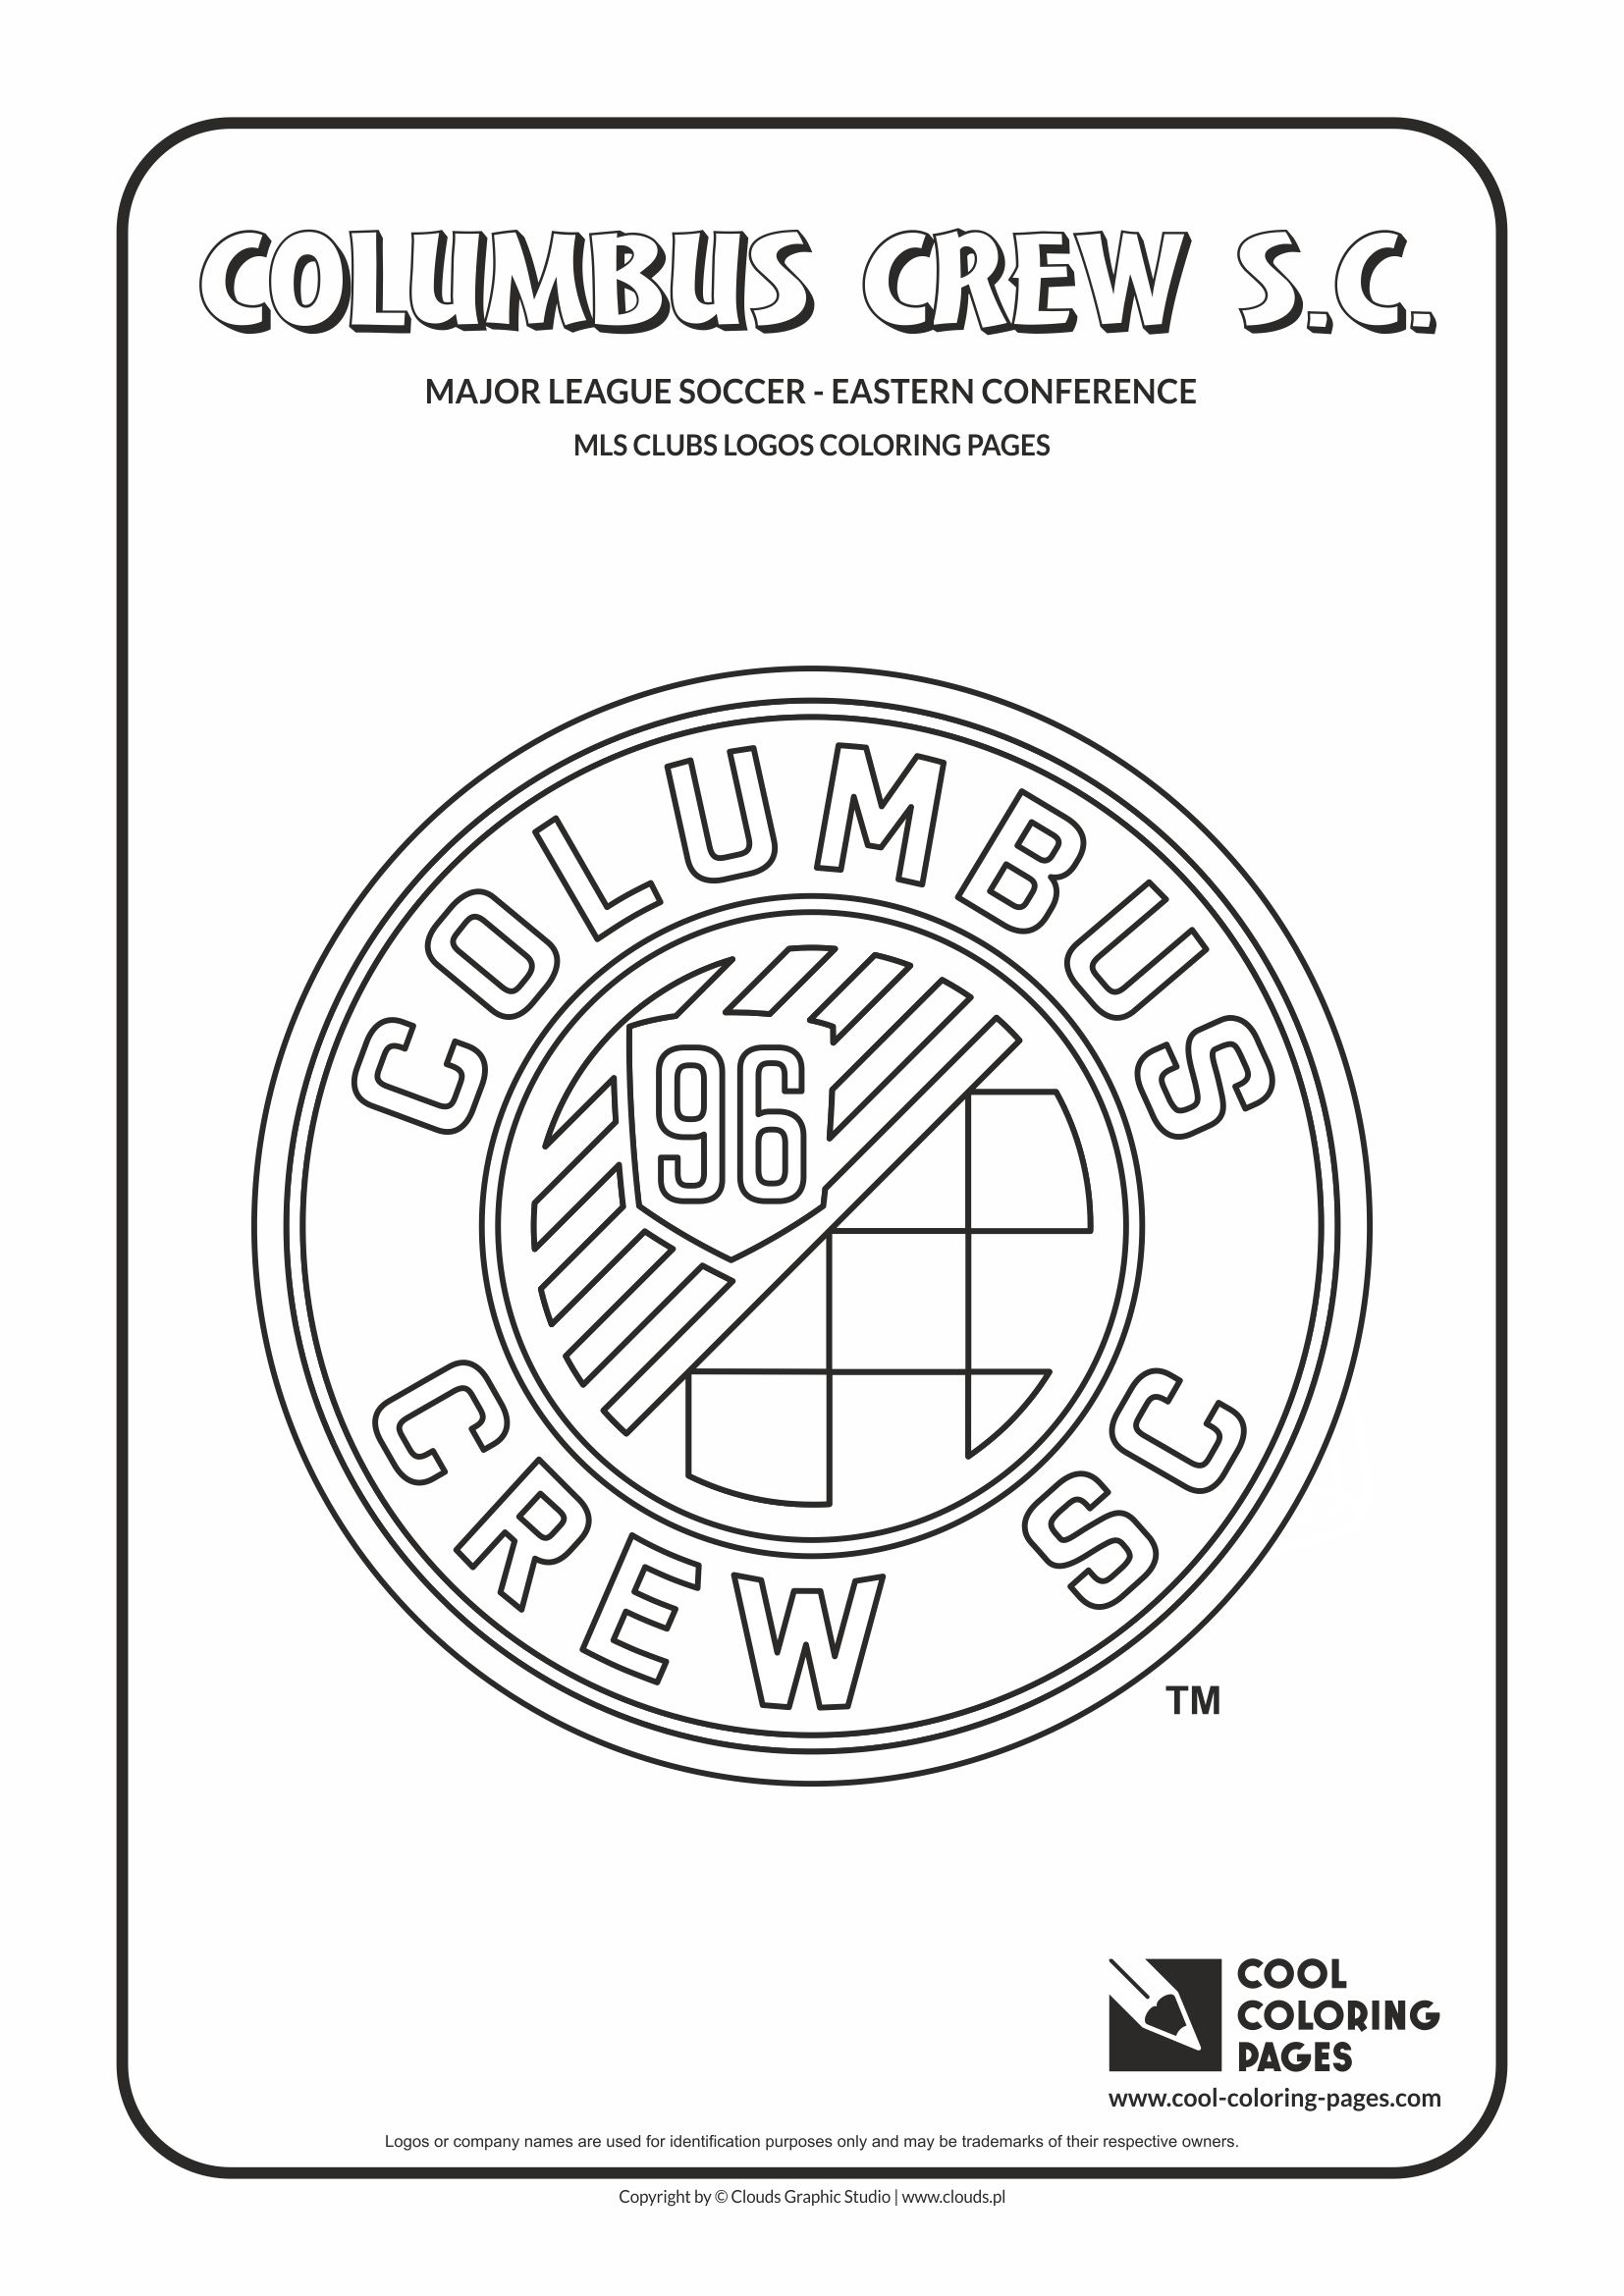 Cool Coloring Pages - Major League Soccer Logos - Eastern Conference / Columbus Crew SC logo / Coloring page with Columbus Crew SC logo